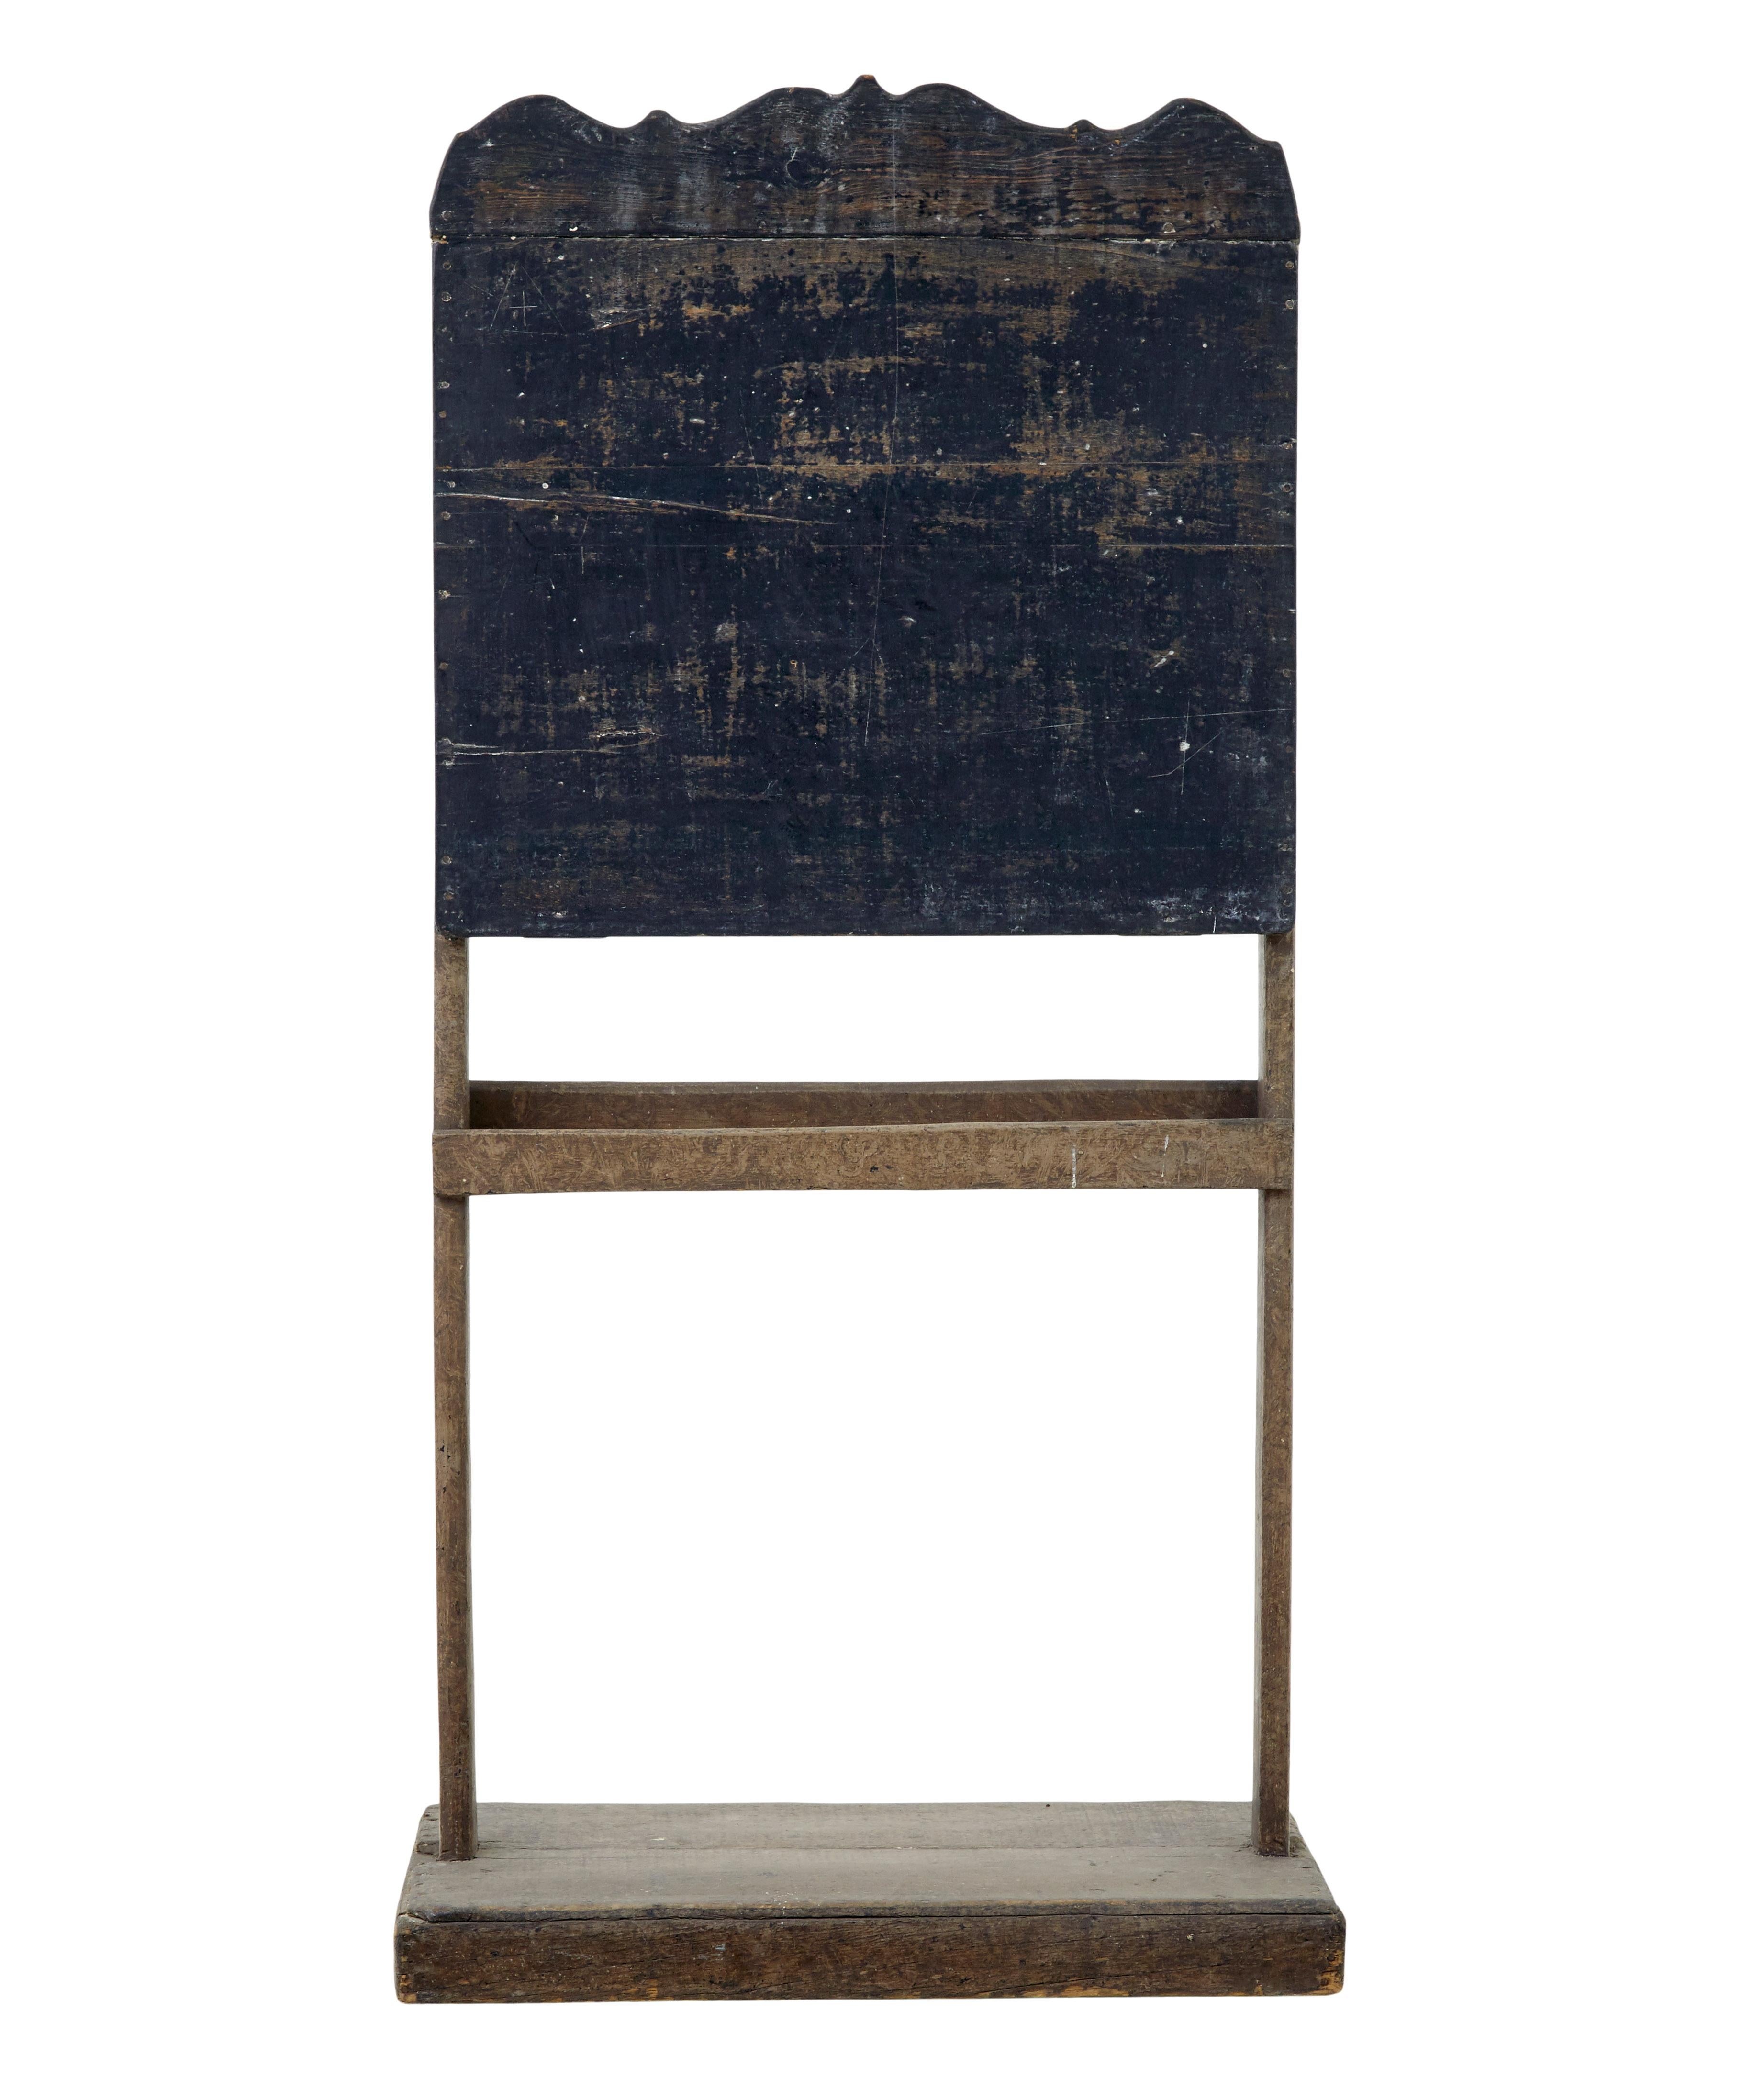 19th century rustic Swedish children's blackboard circa 1880.

Blackboard writing surface on stand with chalk storage well.  Ideal for use in retail for signage or for a quirky feature around the home.

Some loss to paintwork, marks to woodwork.